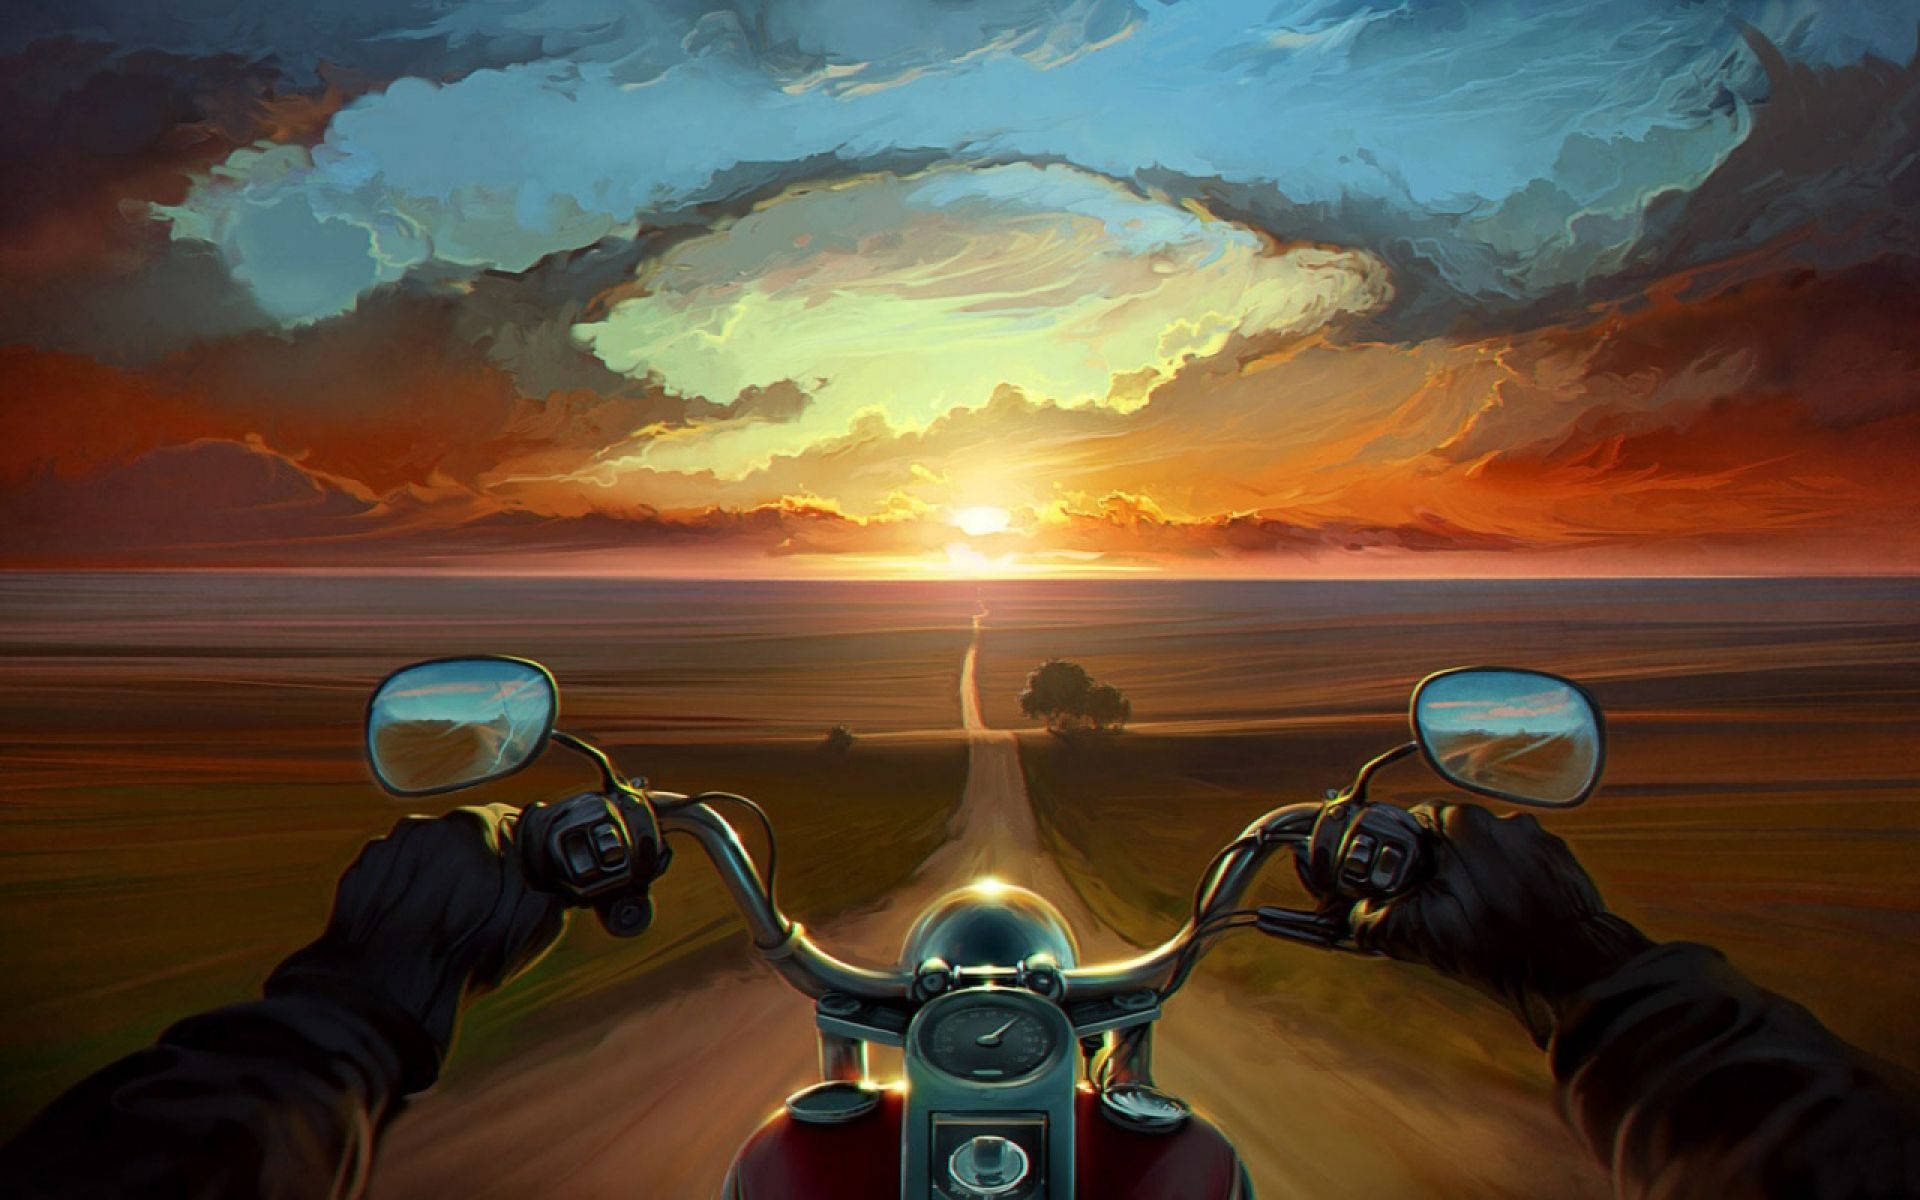 Hd Motorcycle Nature-sunset View Art Background